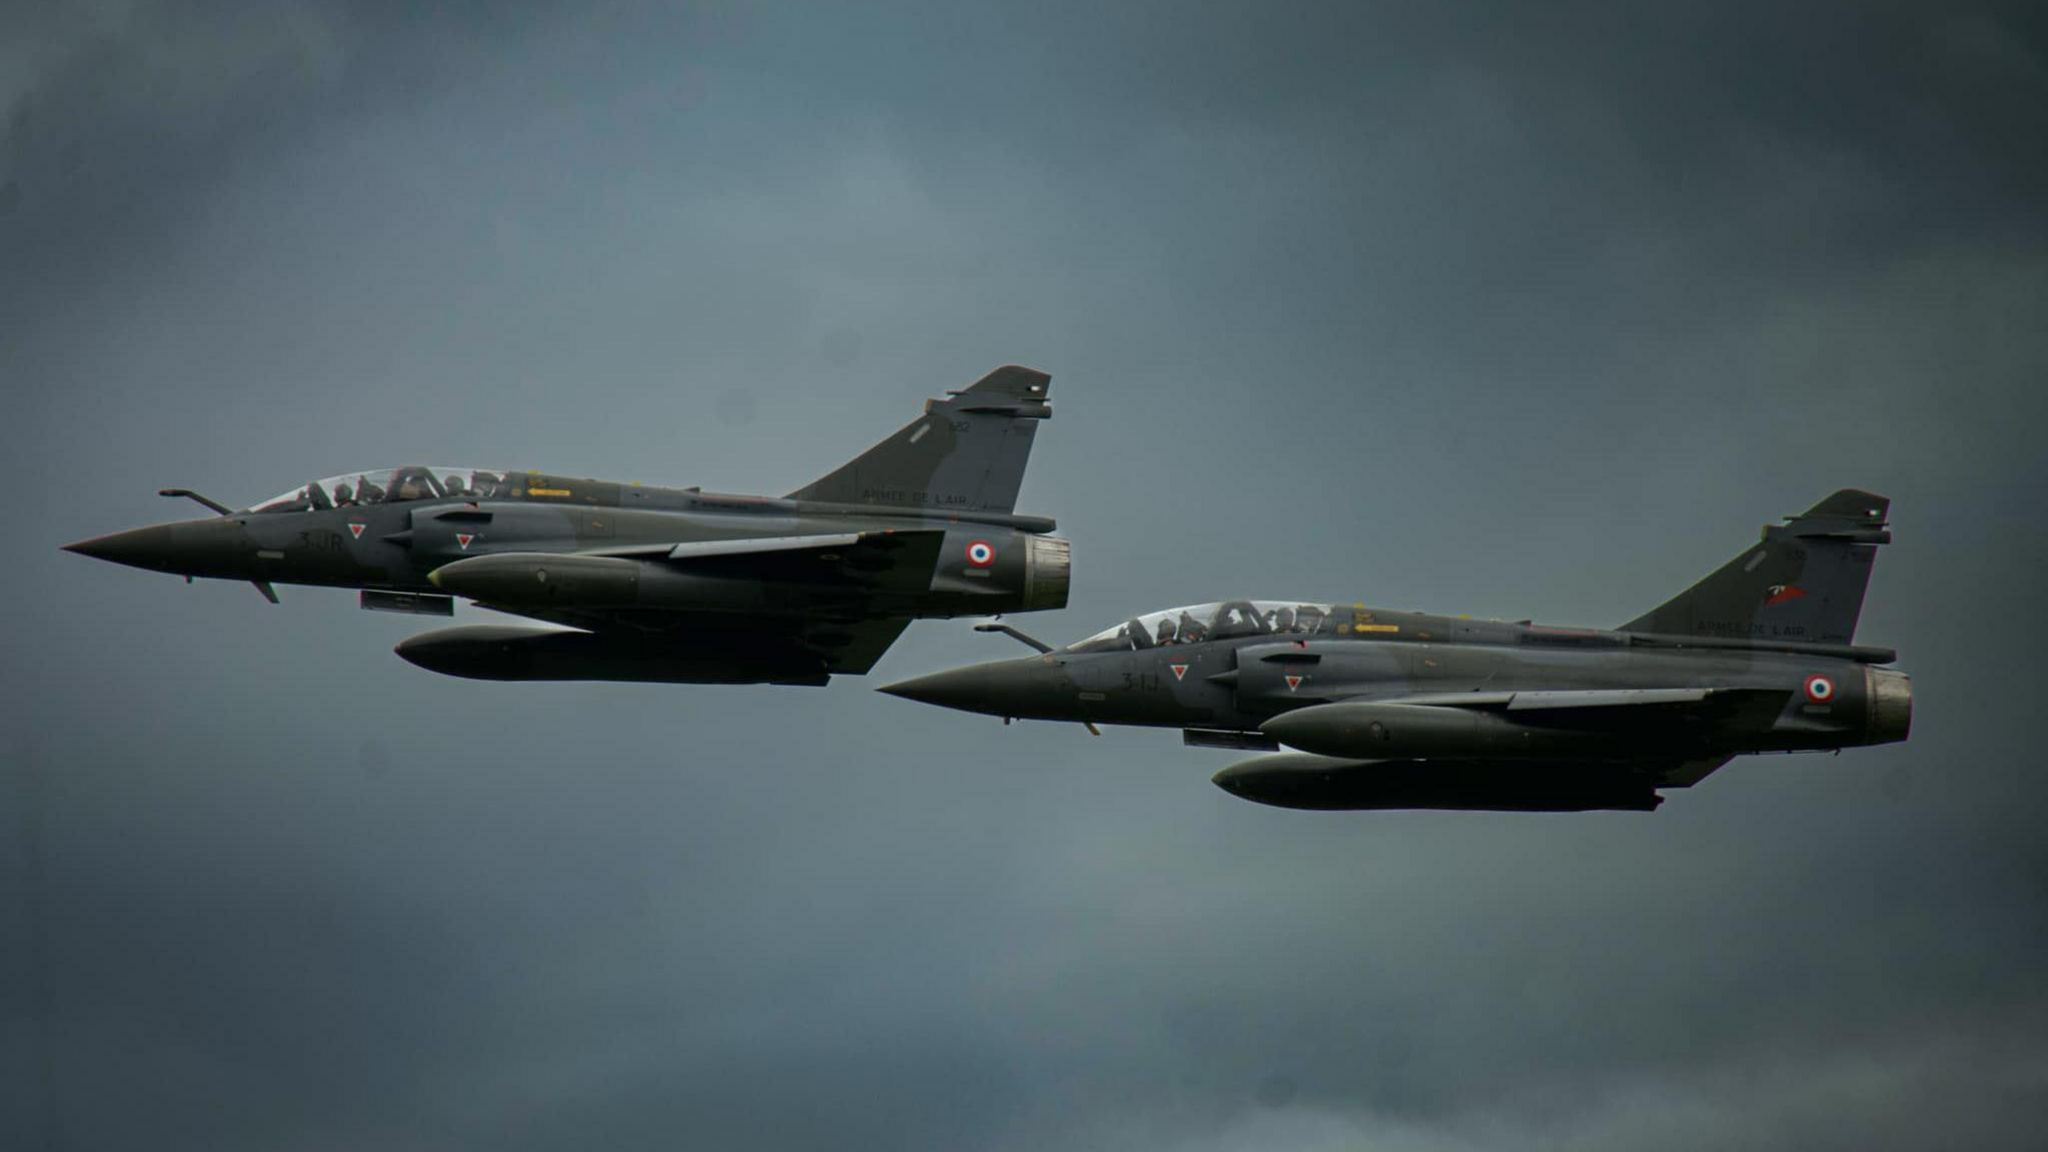 Two aircraft fly side by side in the grey sky